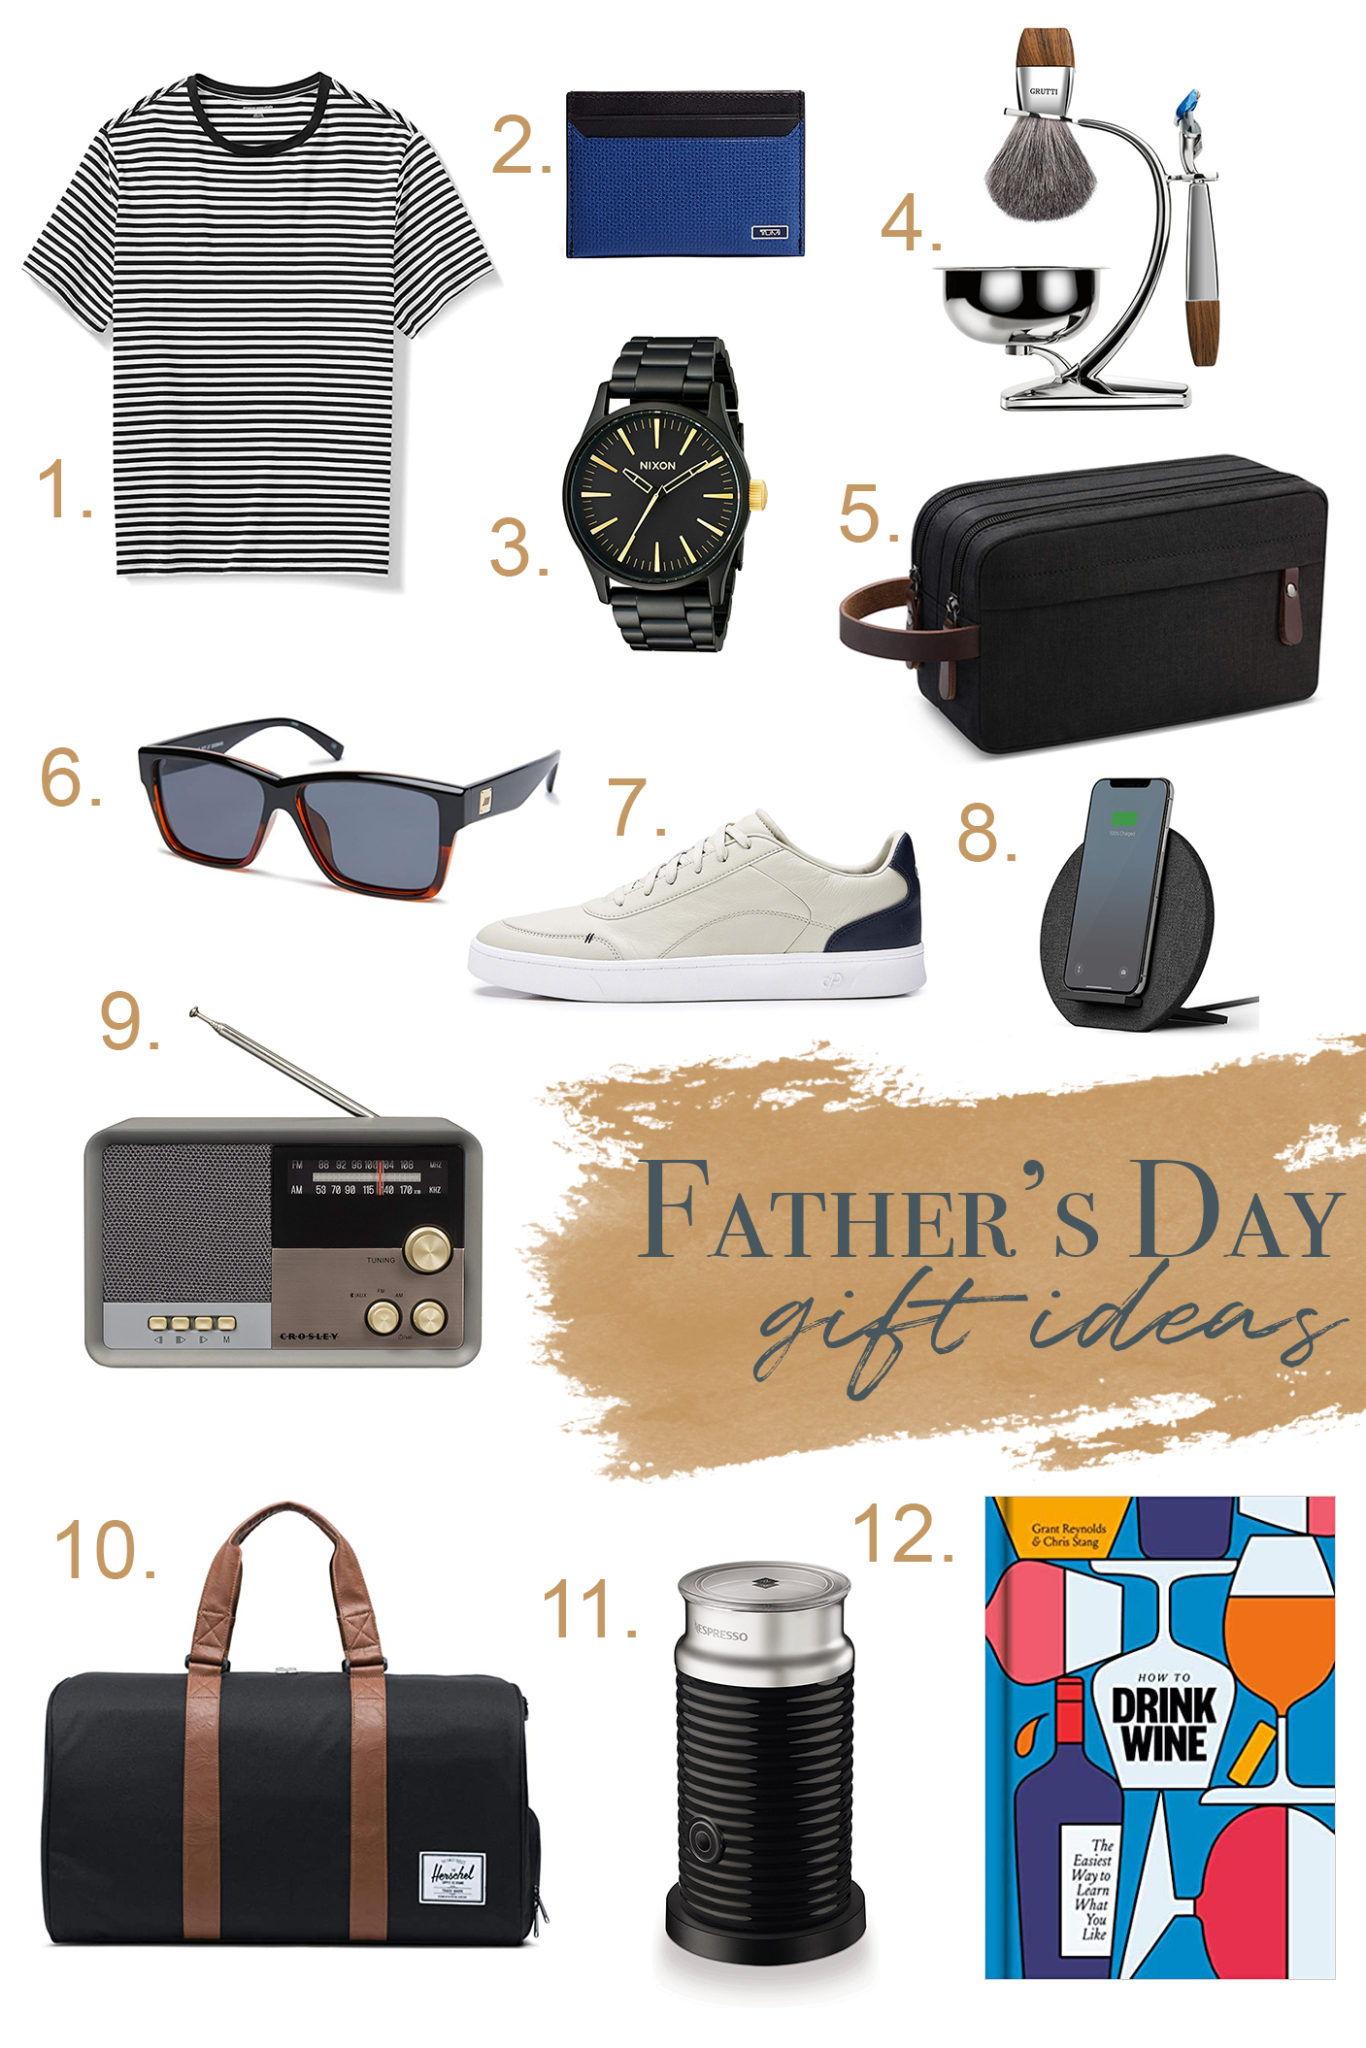 Amazon Fathers day Gifts